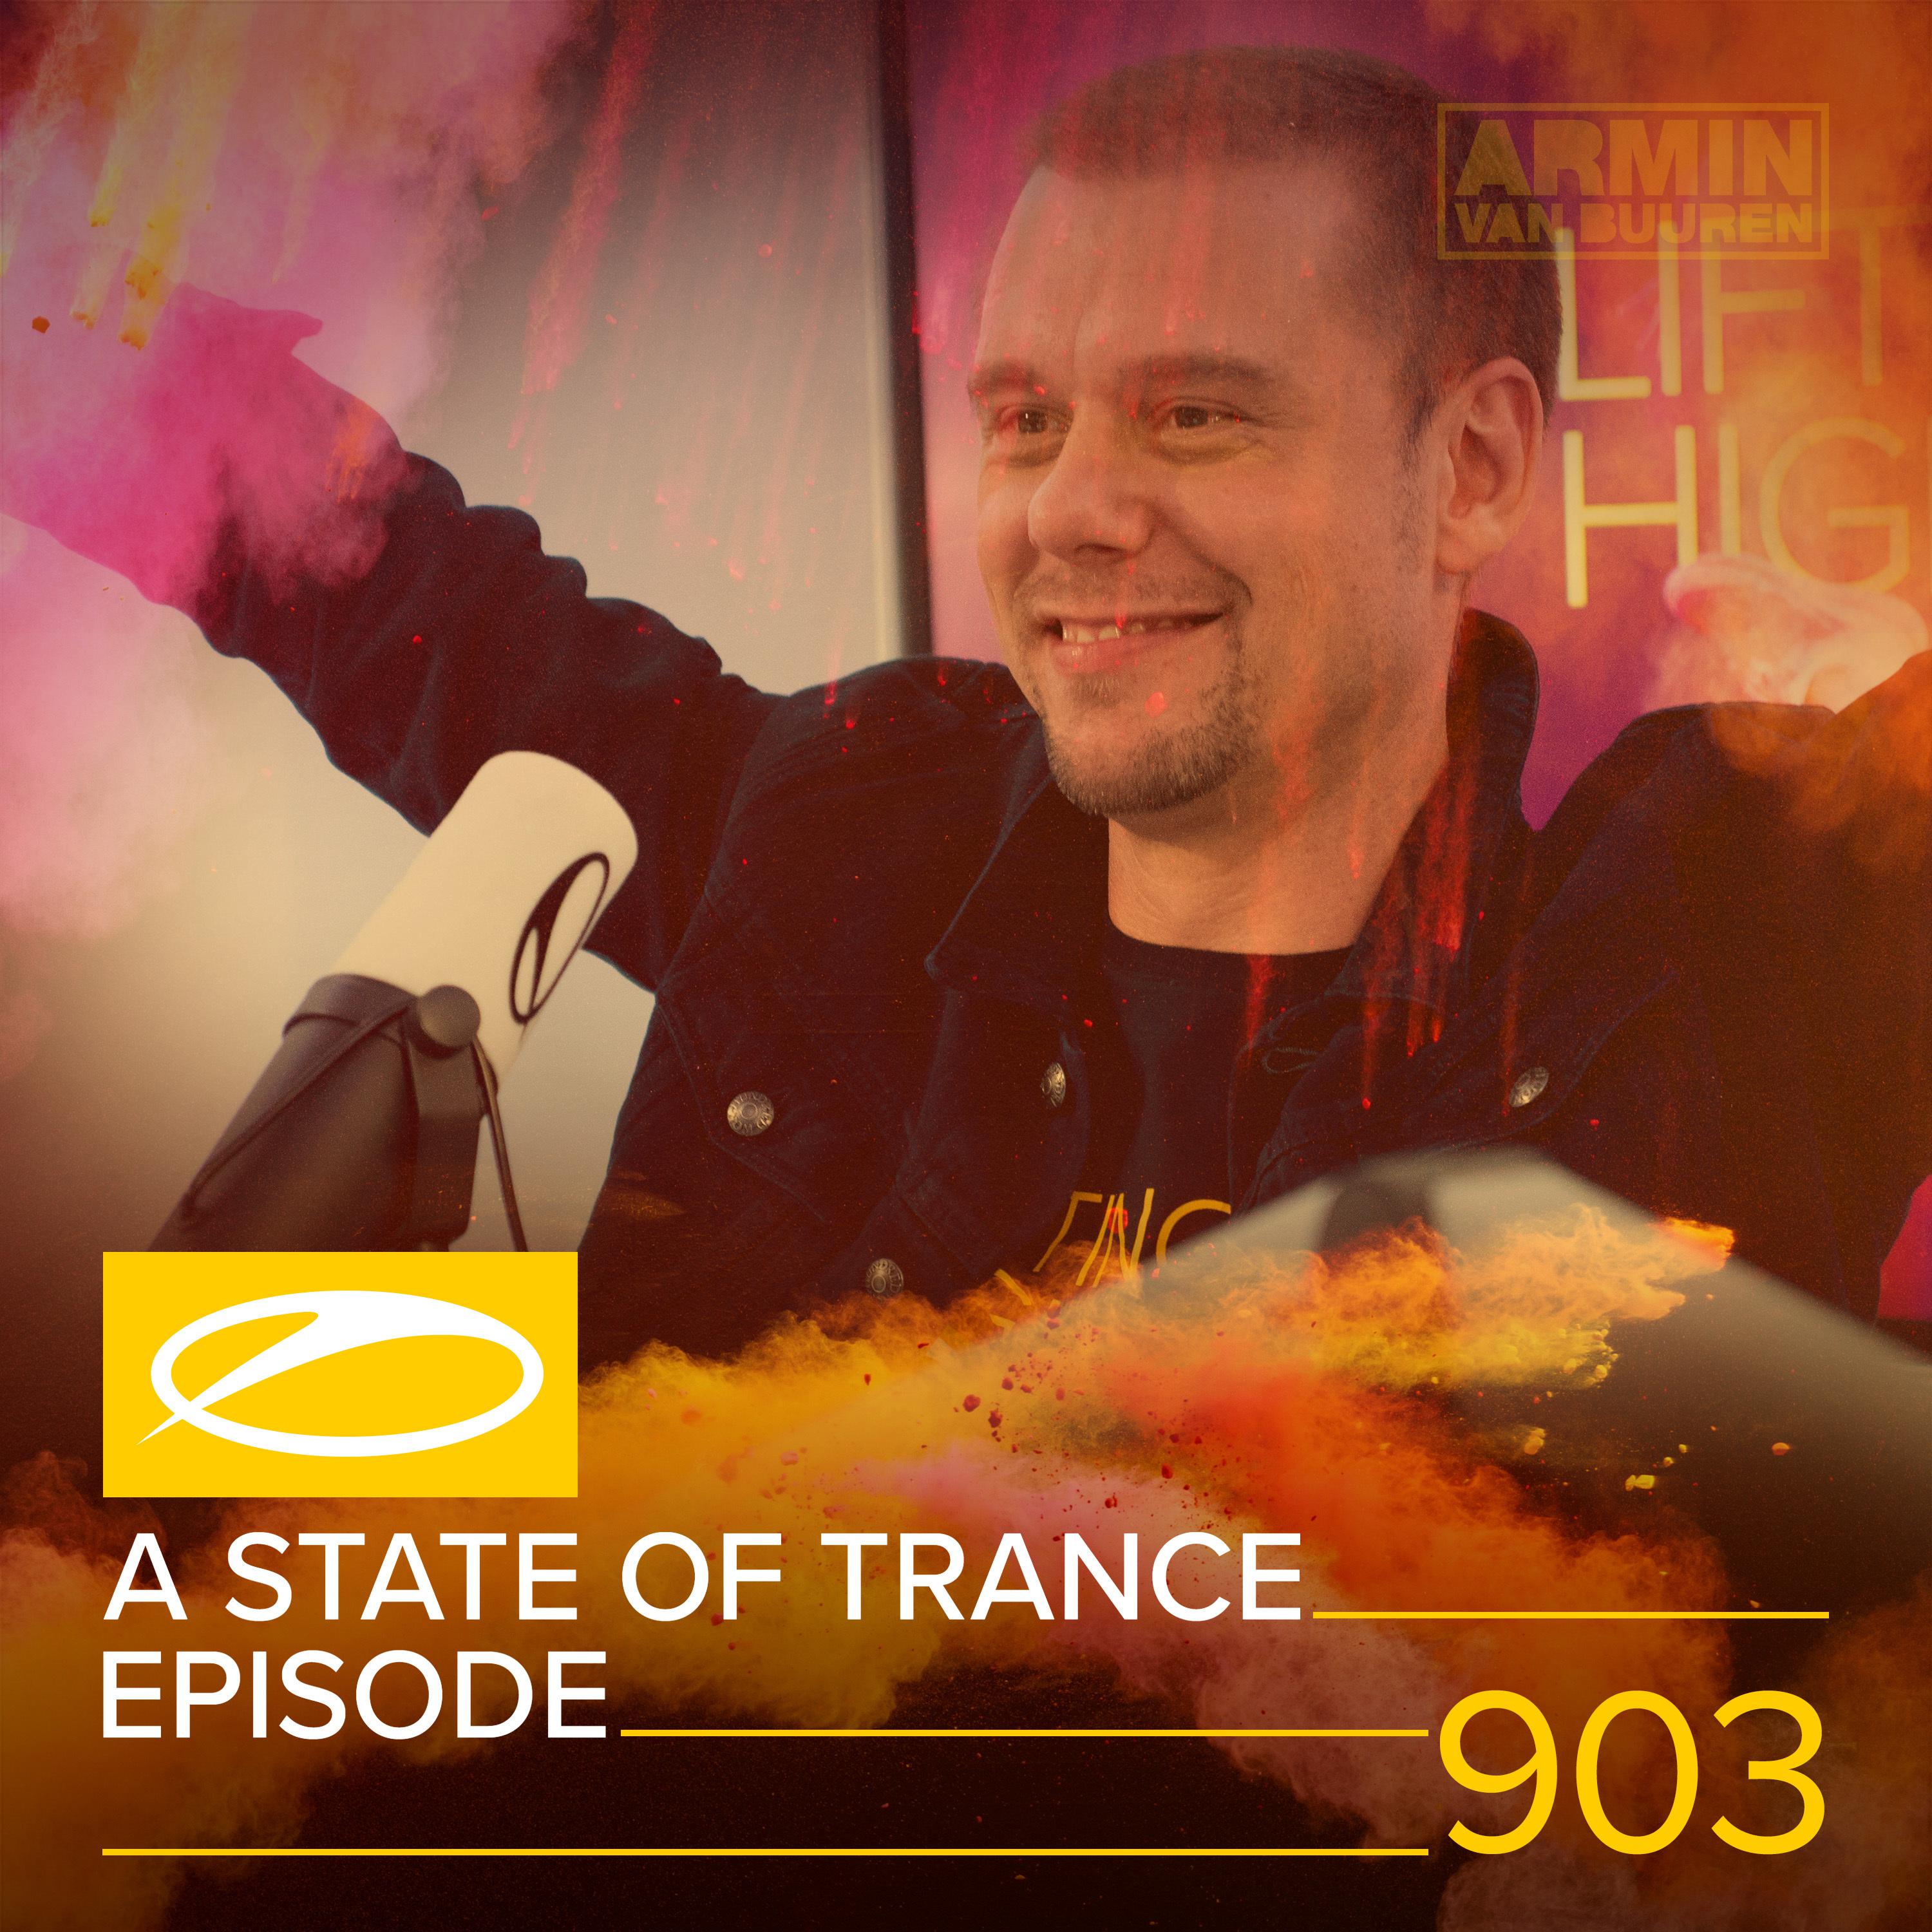 STANDERWICK - This Letter (ASOT 903)